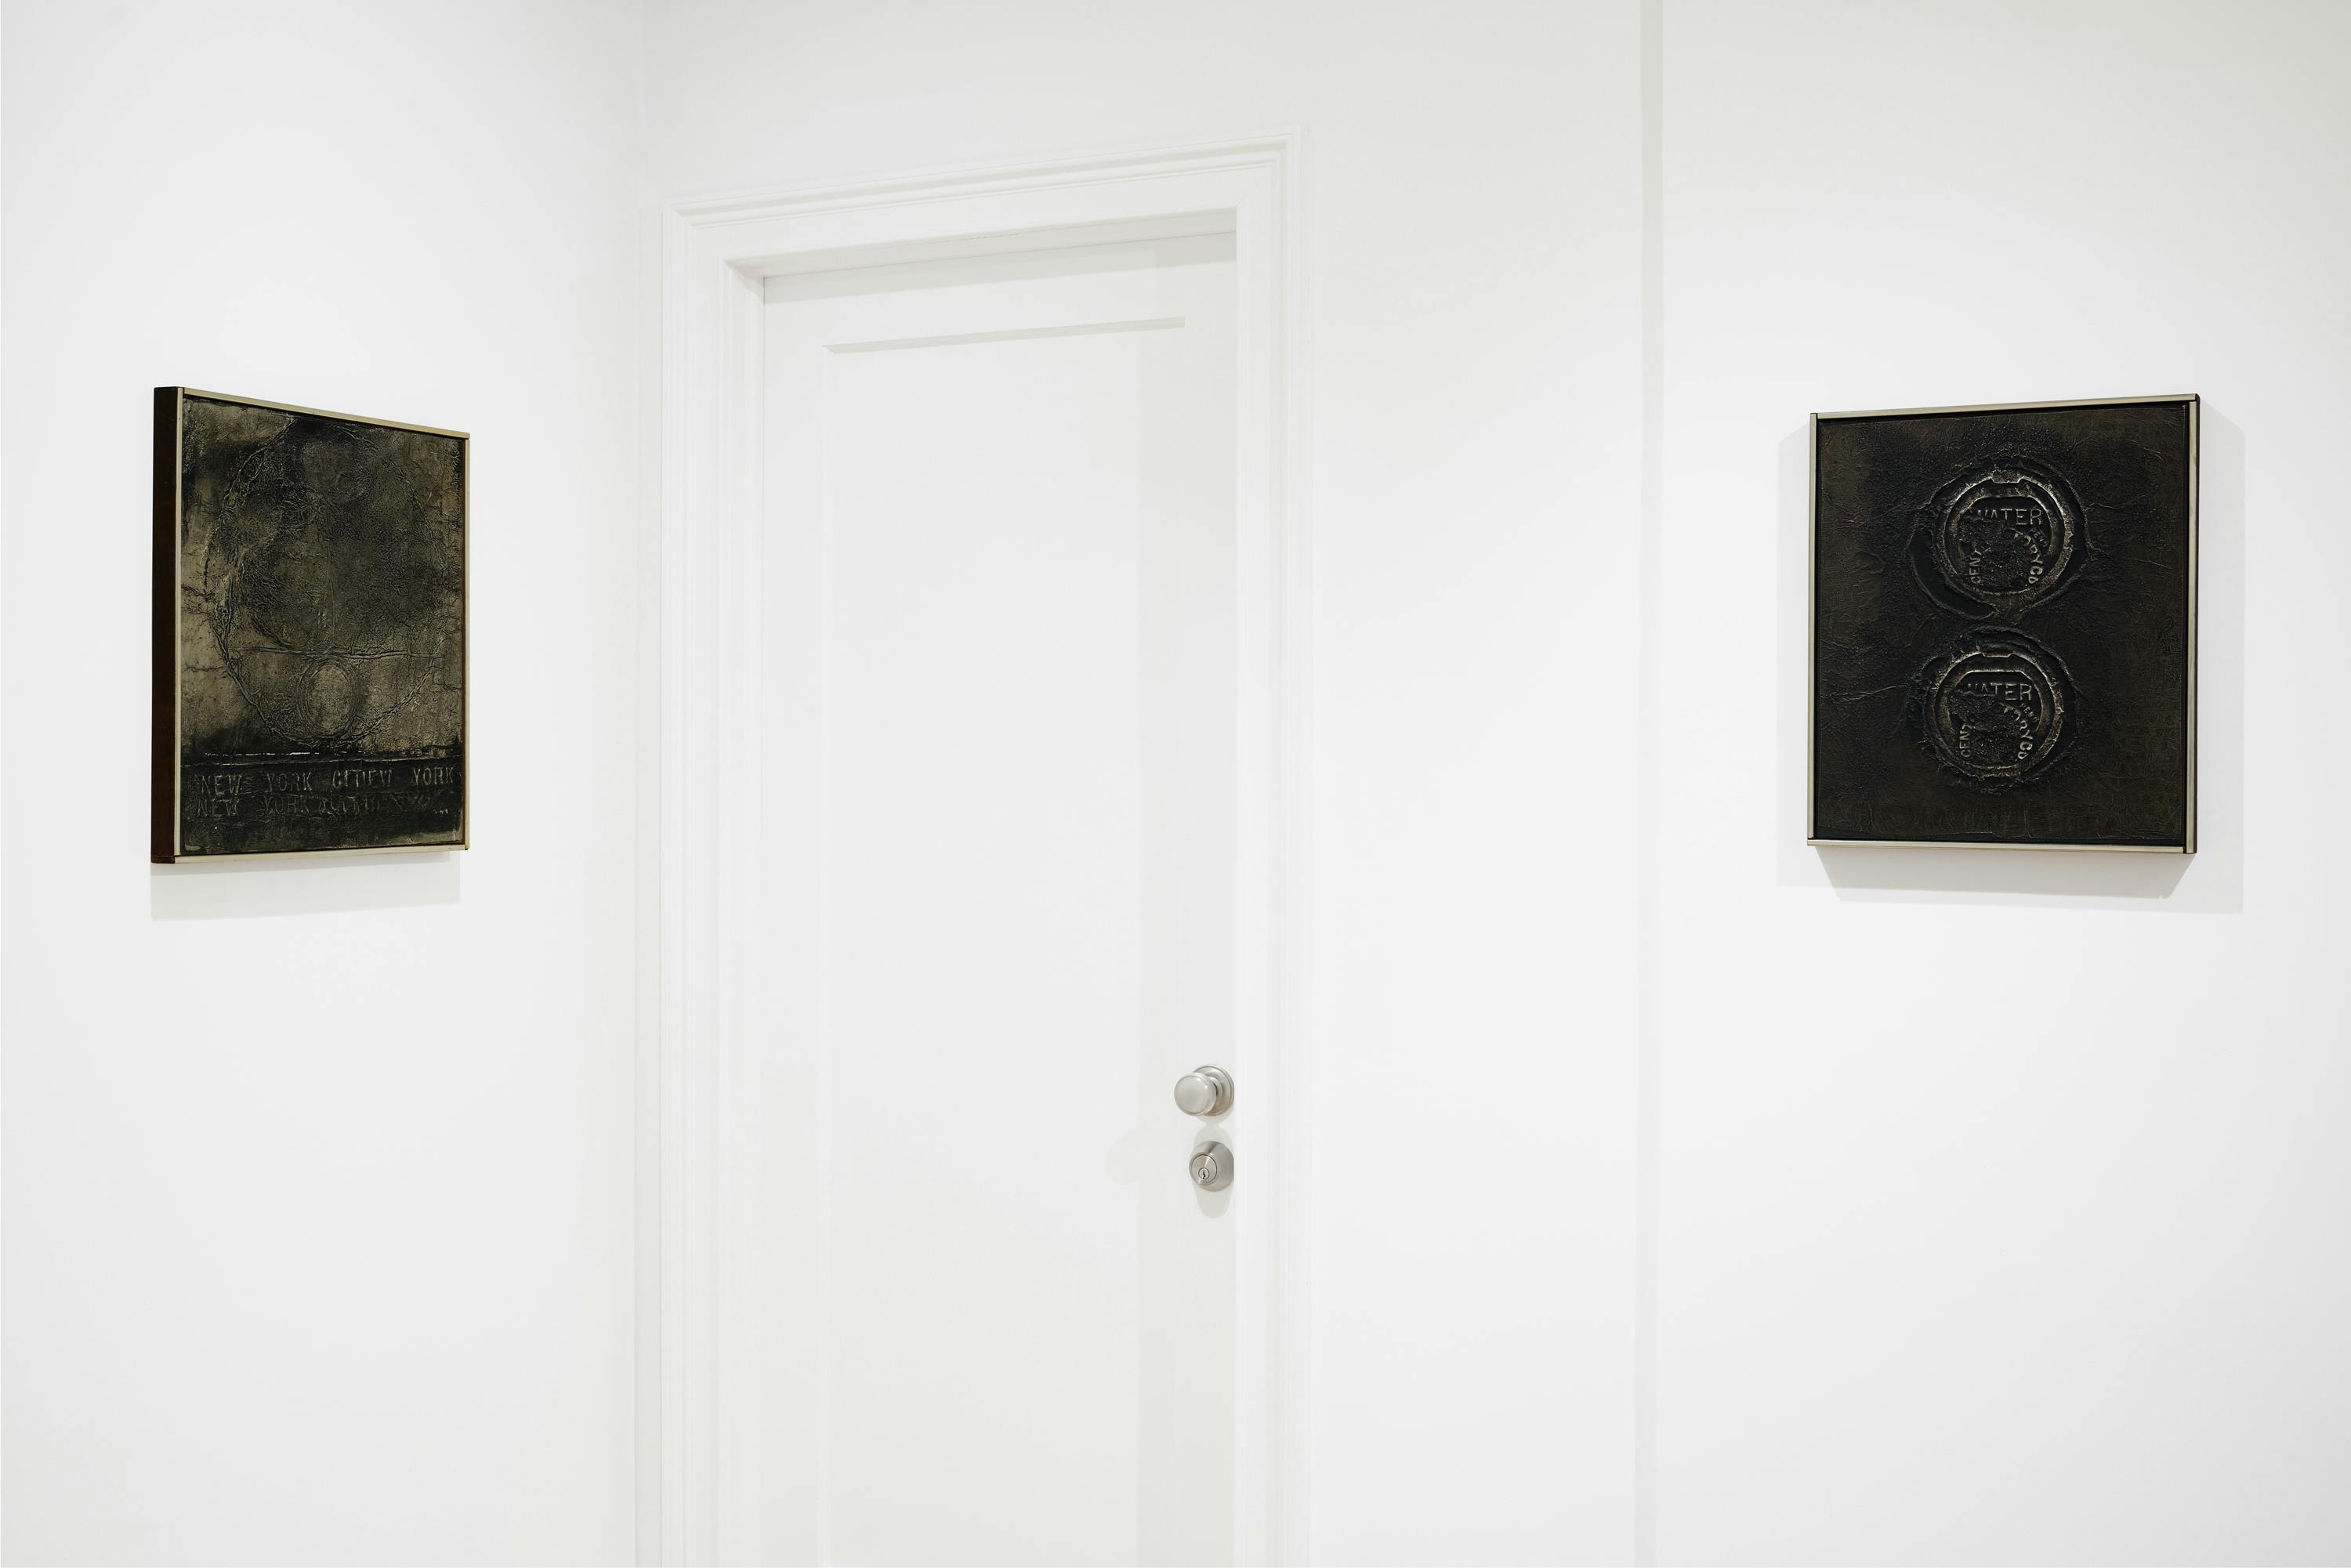 Installation view of two wall-mounted aluminum foil works by José Antonio Fernández-Muro.